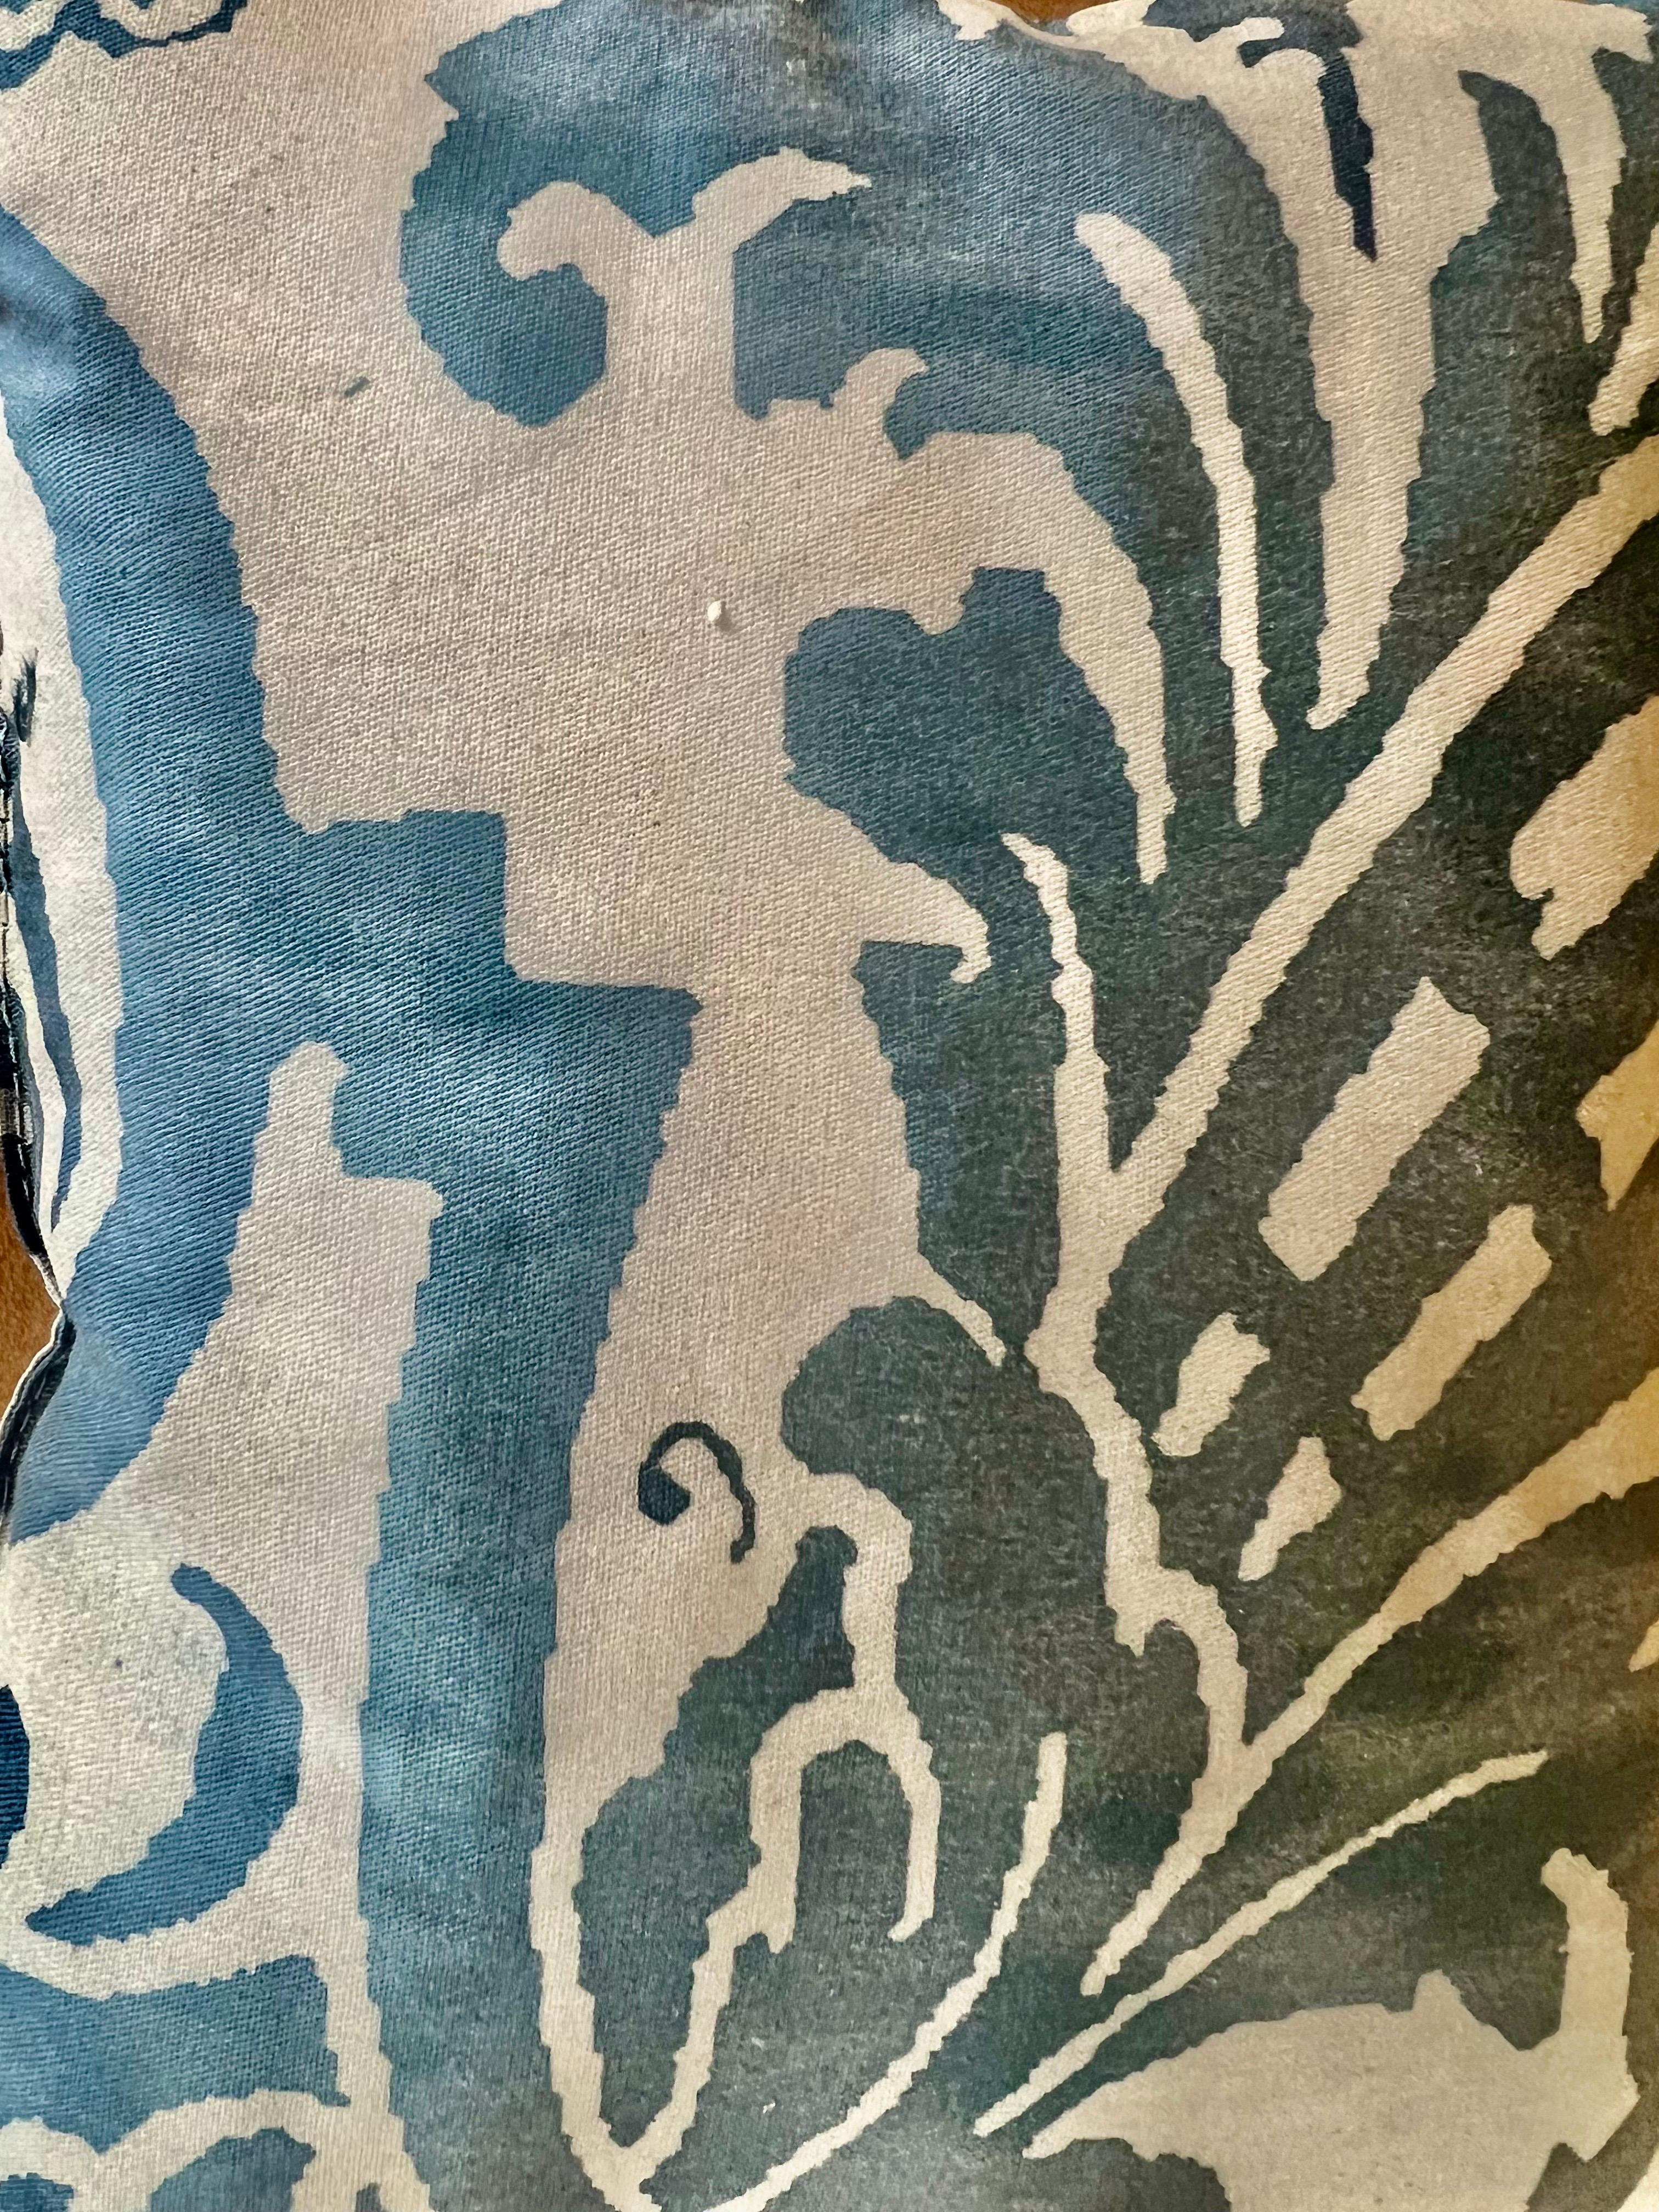 Fortuny textile sachet filled with lavender, featuring a vibrant shade of blue with swirling acanthus leaves on a white background. The design showcases both the vibrancy and elegance of the fabric.